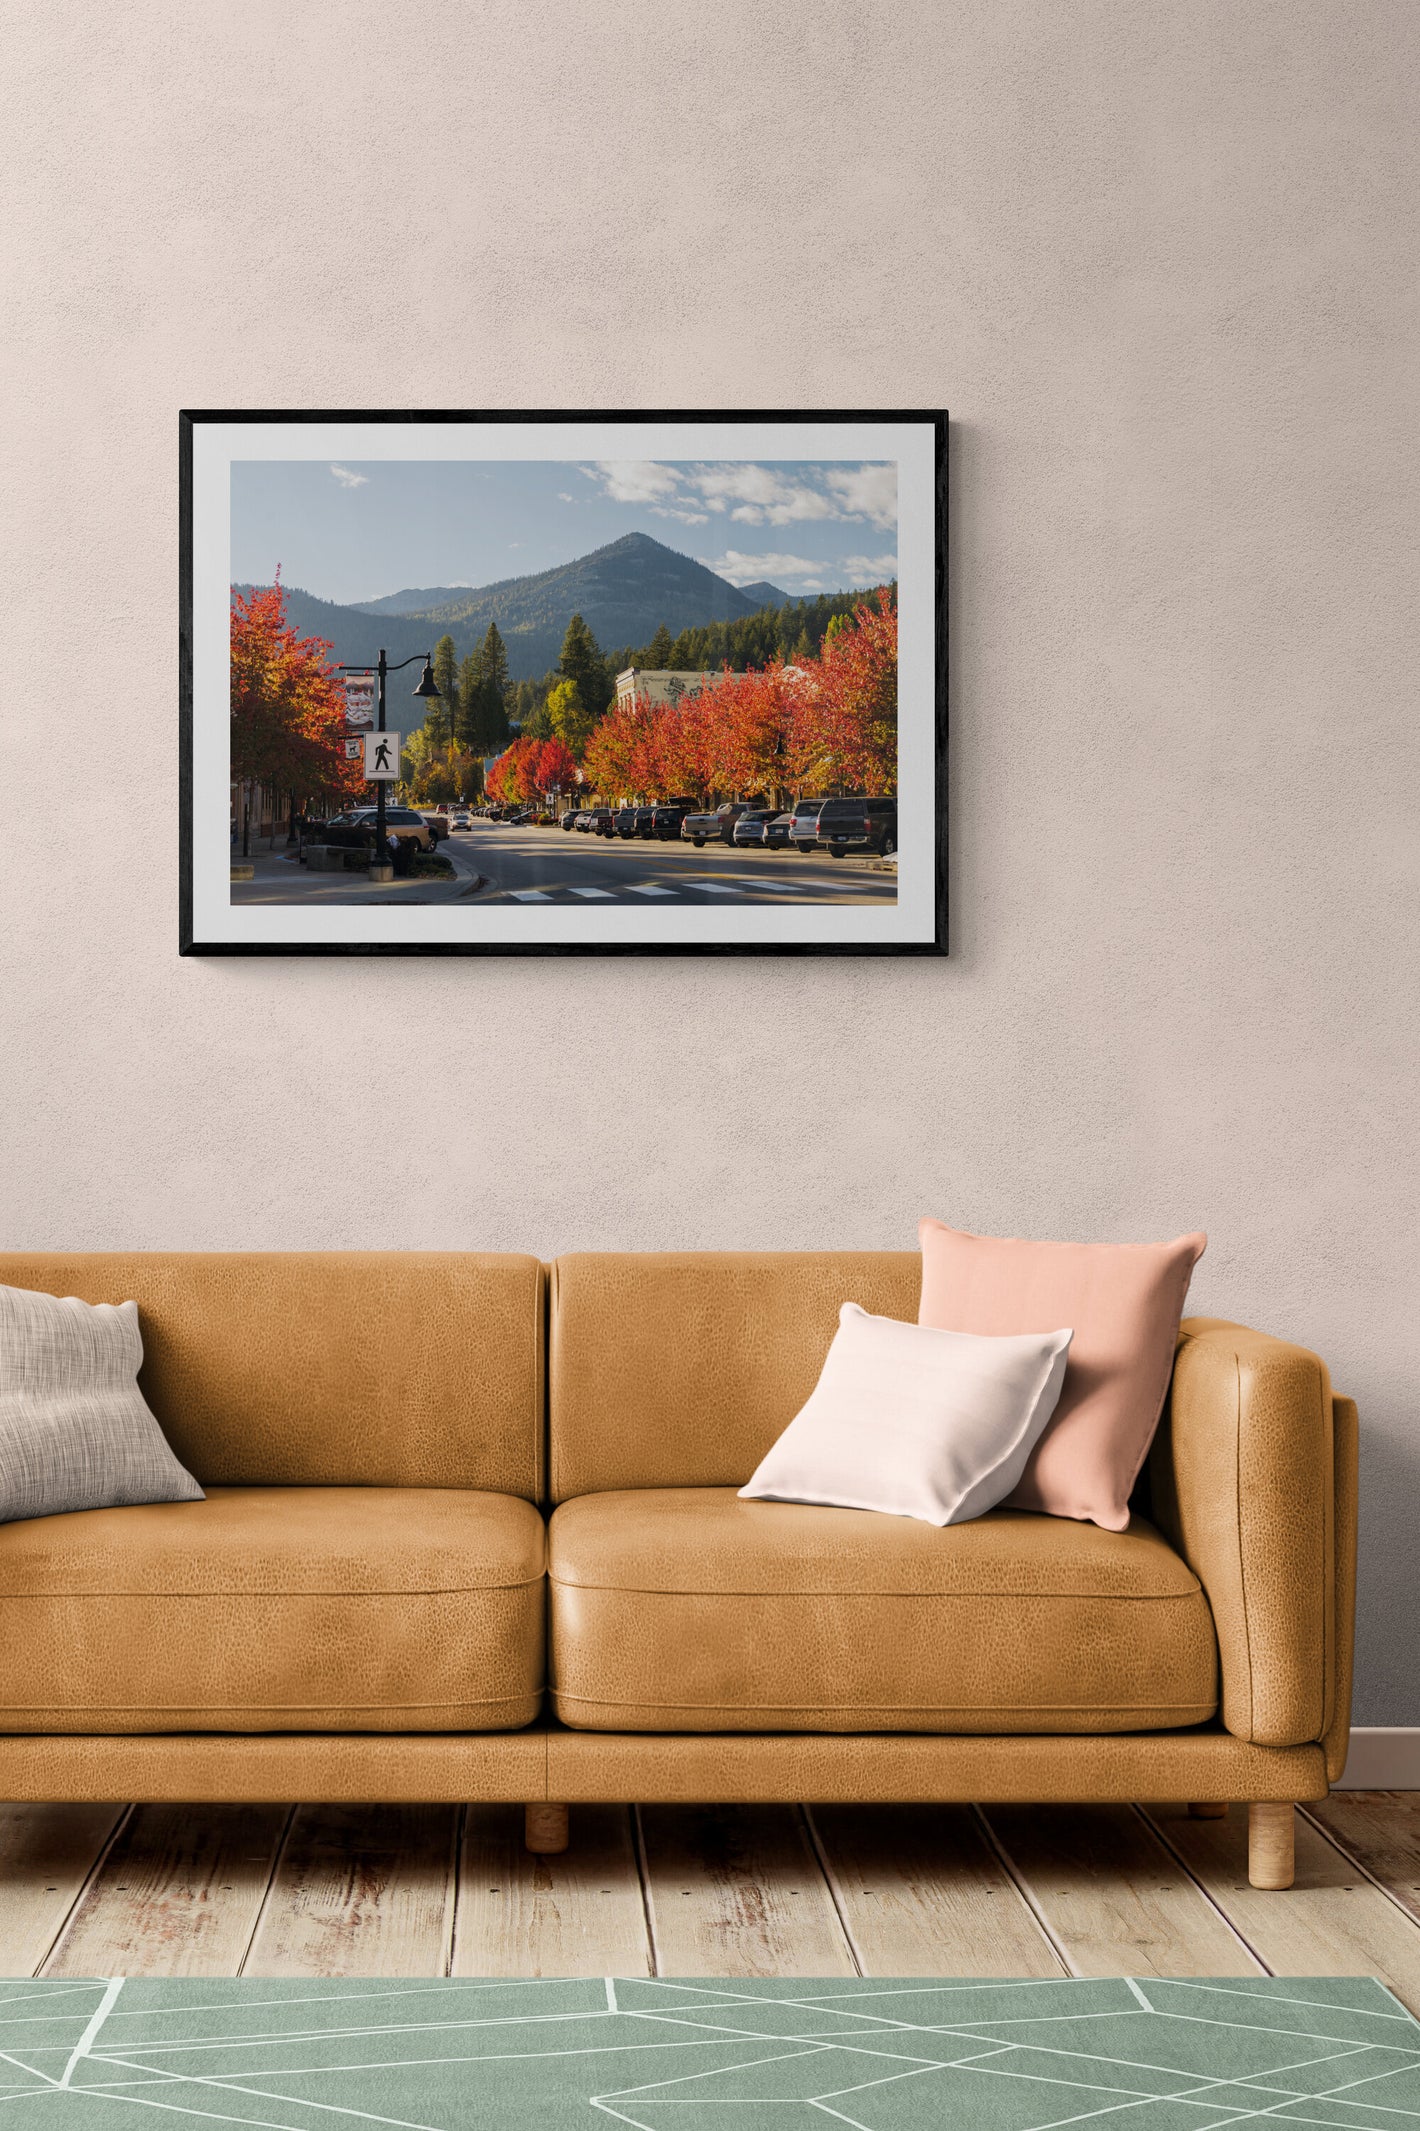 Framed photograph of Rossland, British Columbia on a wall in front of a couch.